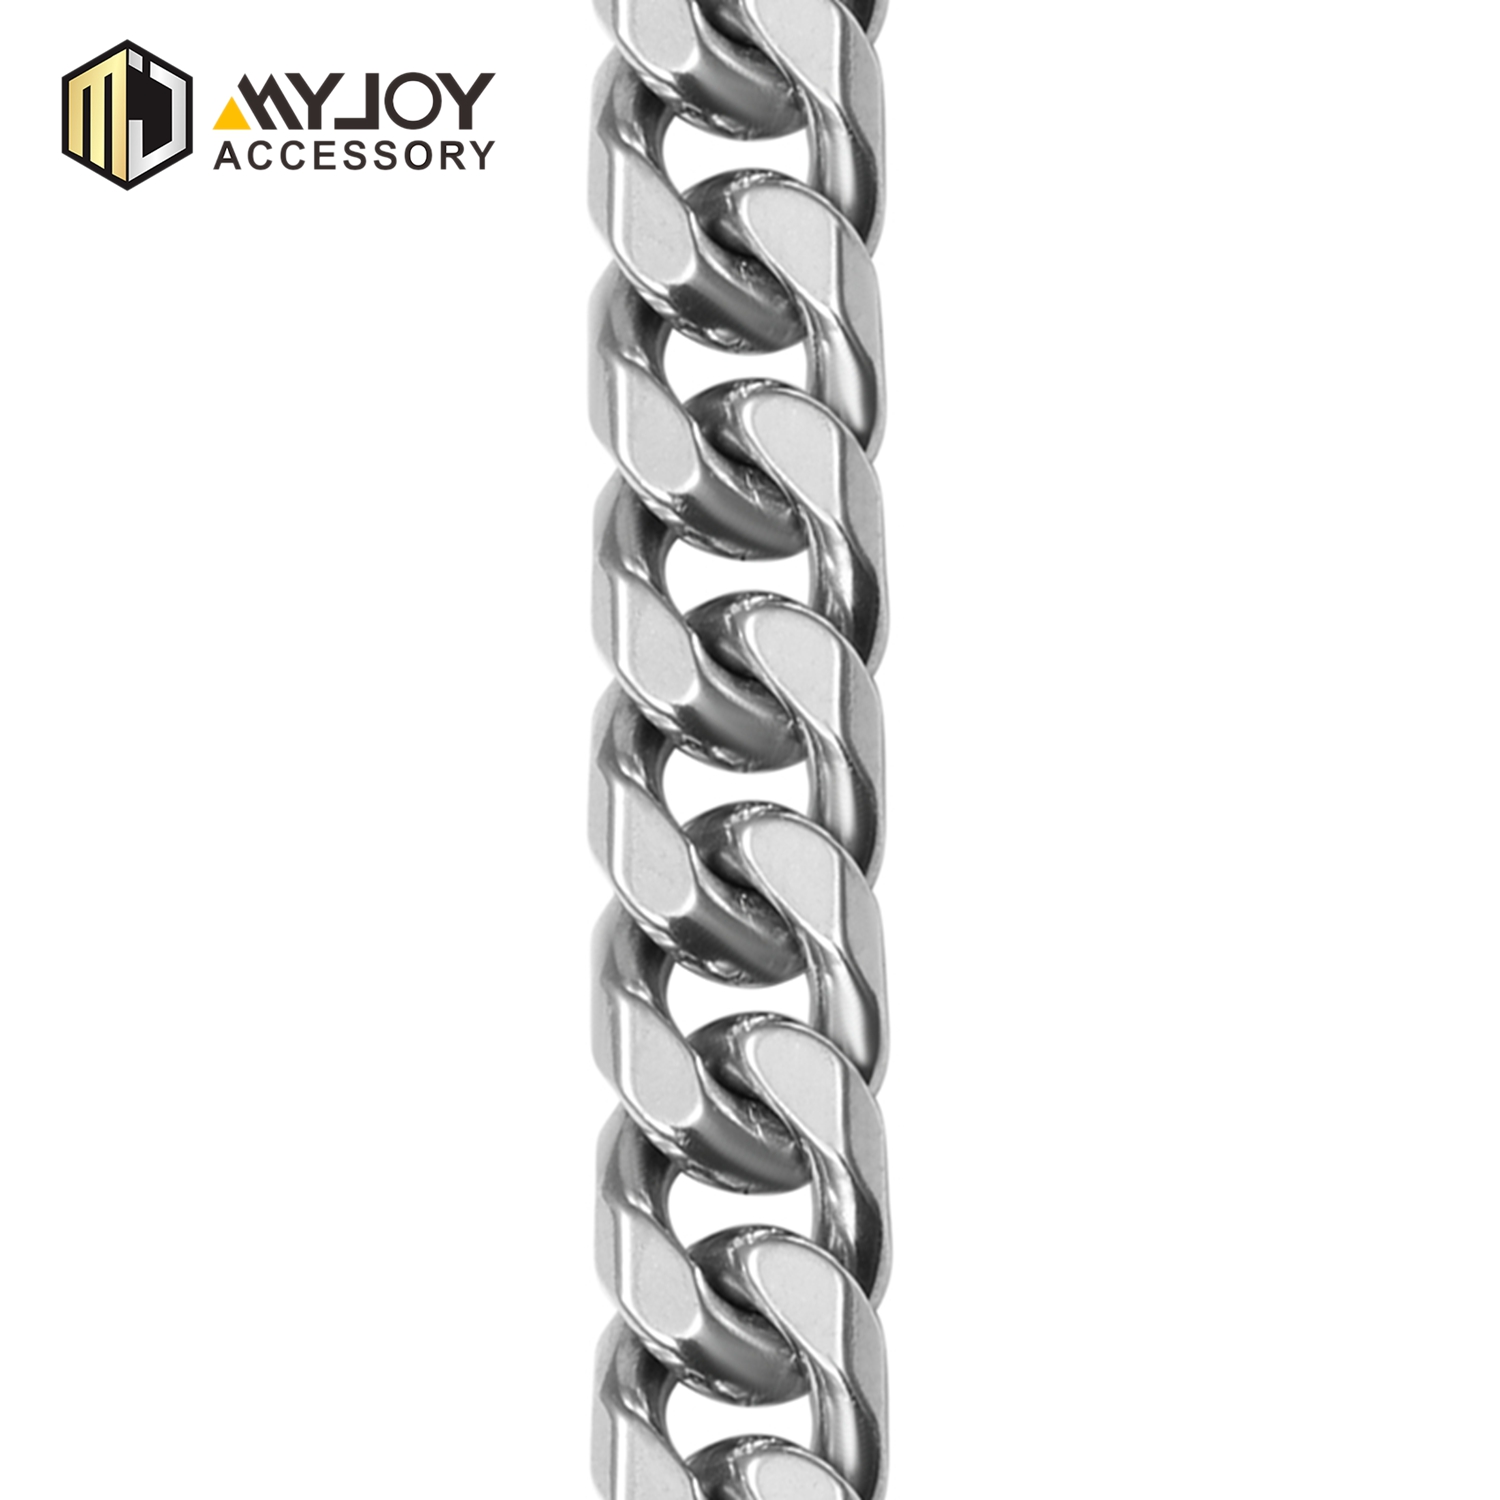 MYJOY zinc chain strap Suppliers for purses-1